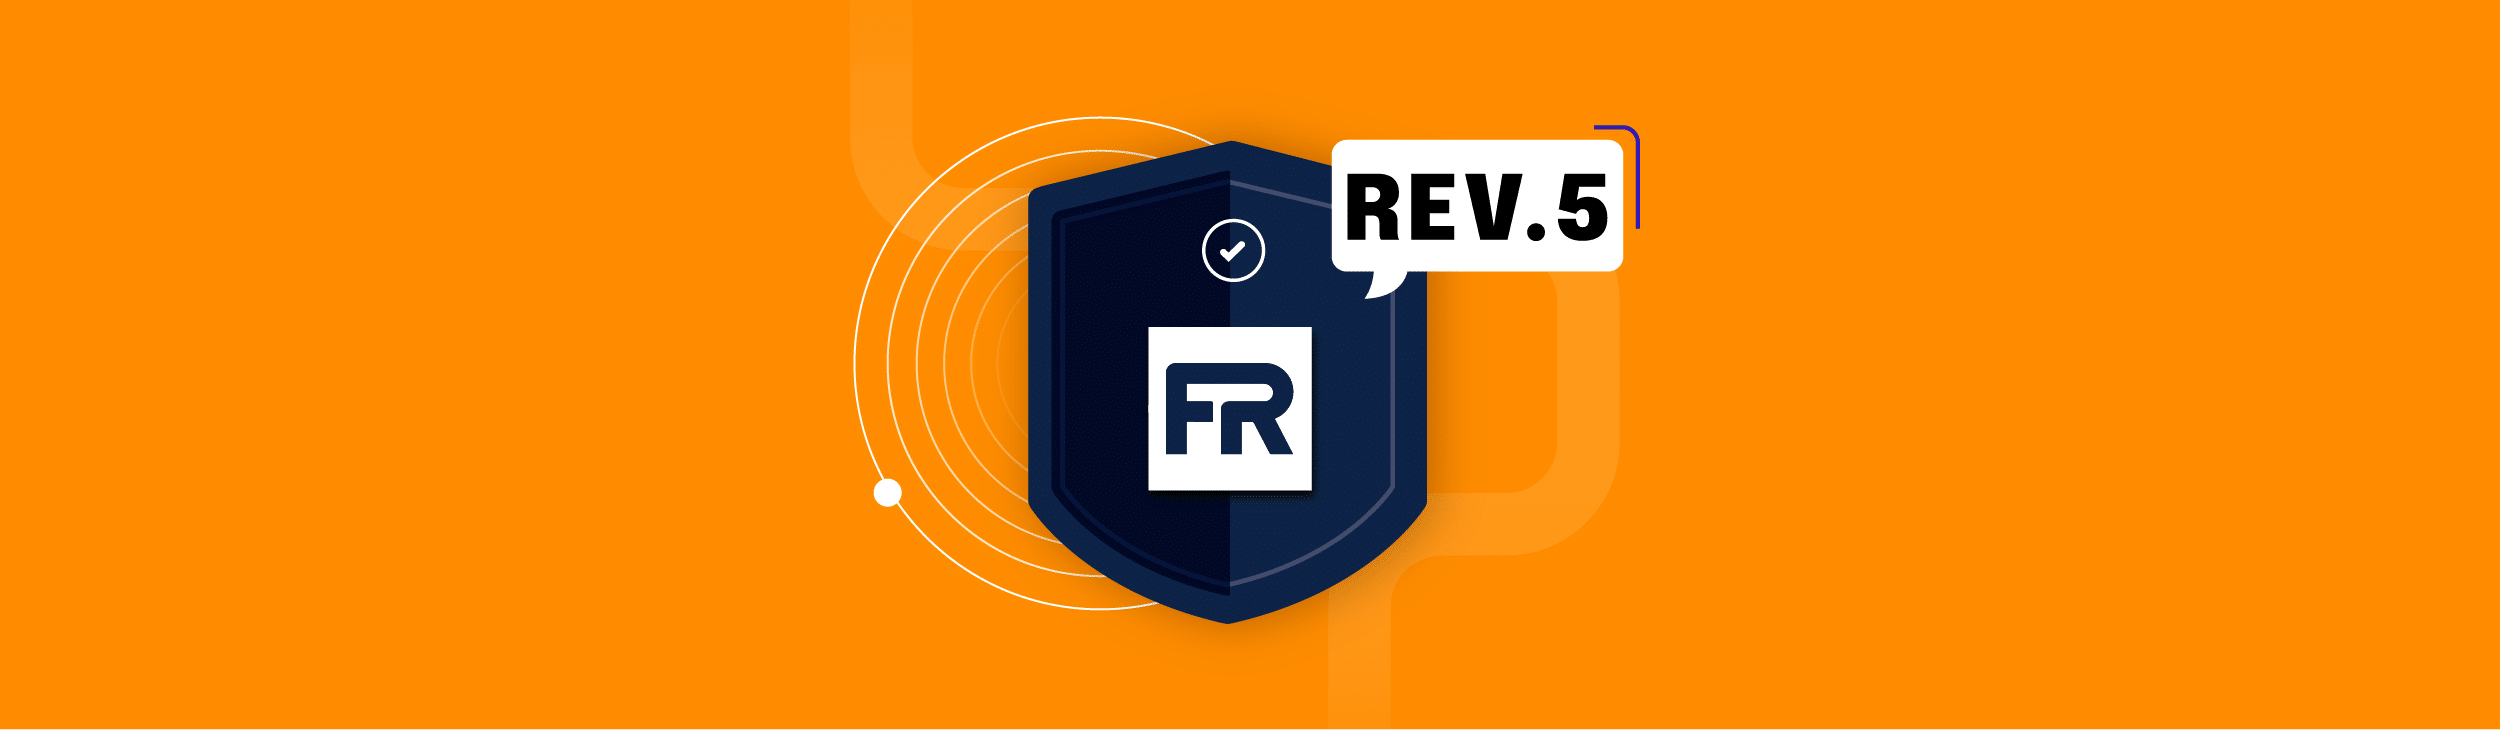 FedRAMP Rev. 5: Everything You Need to Know to Transition – Source: securityboulevard.com